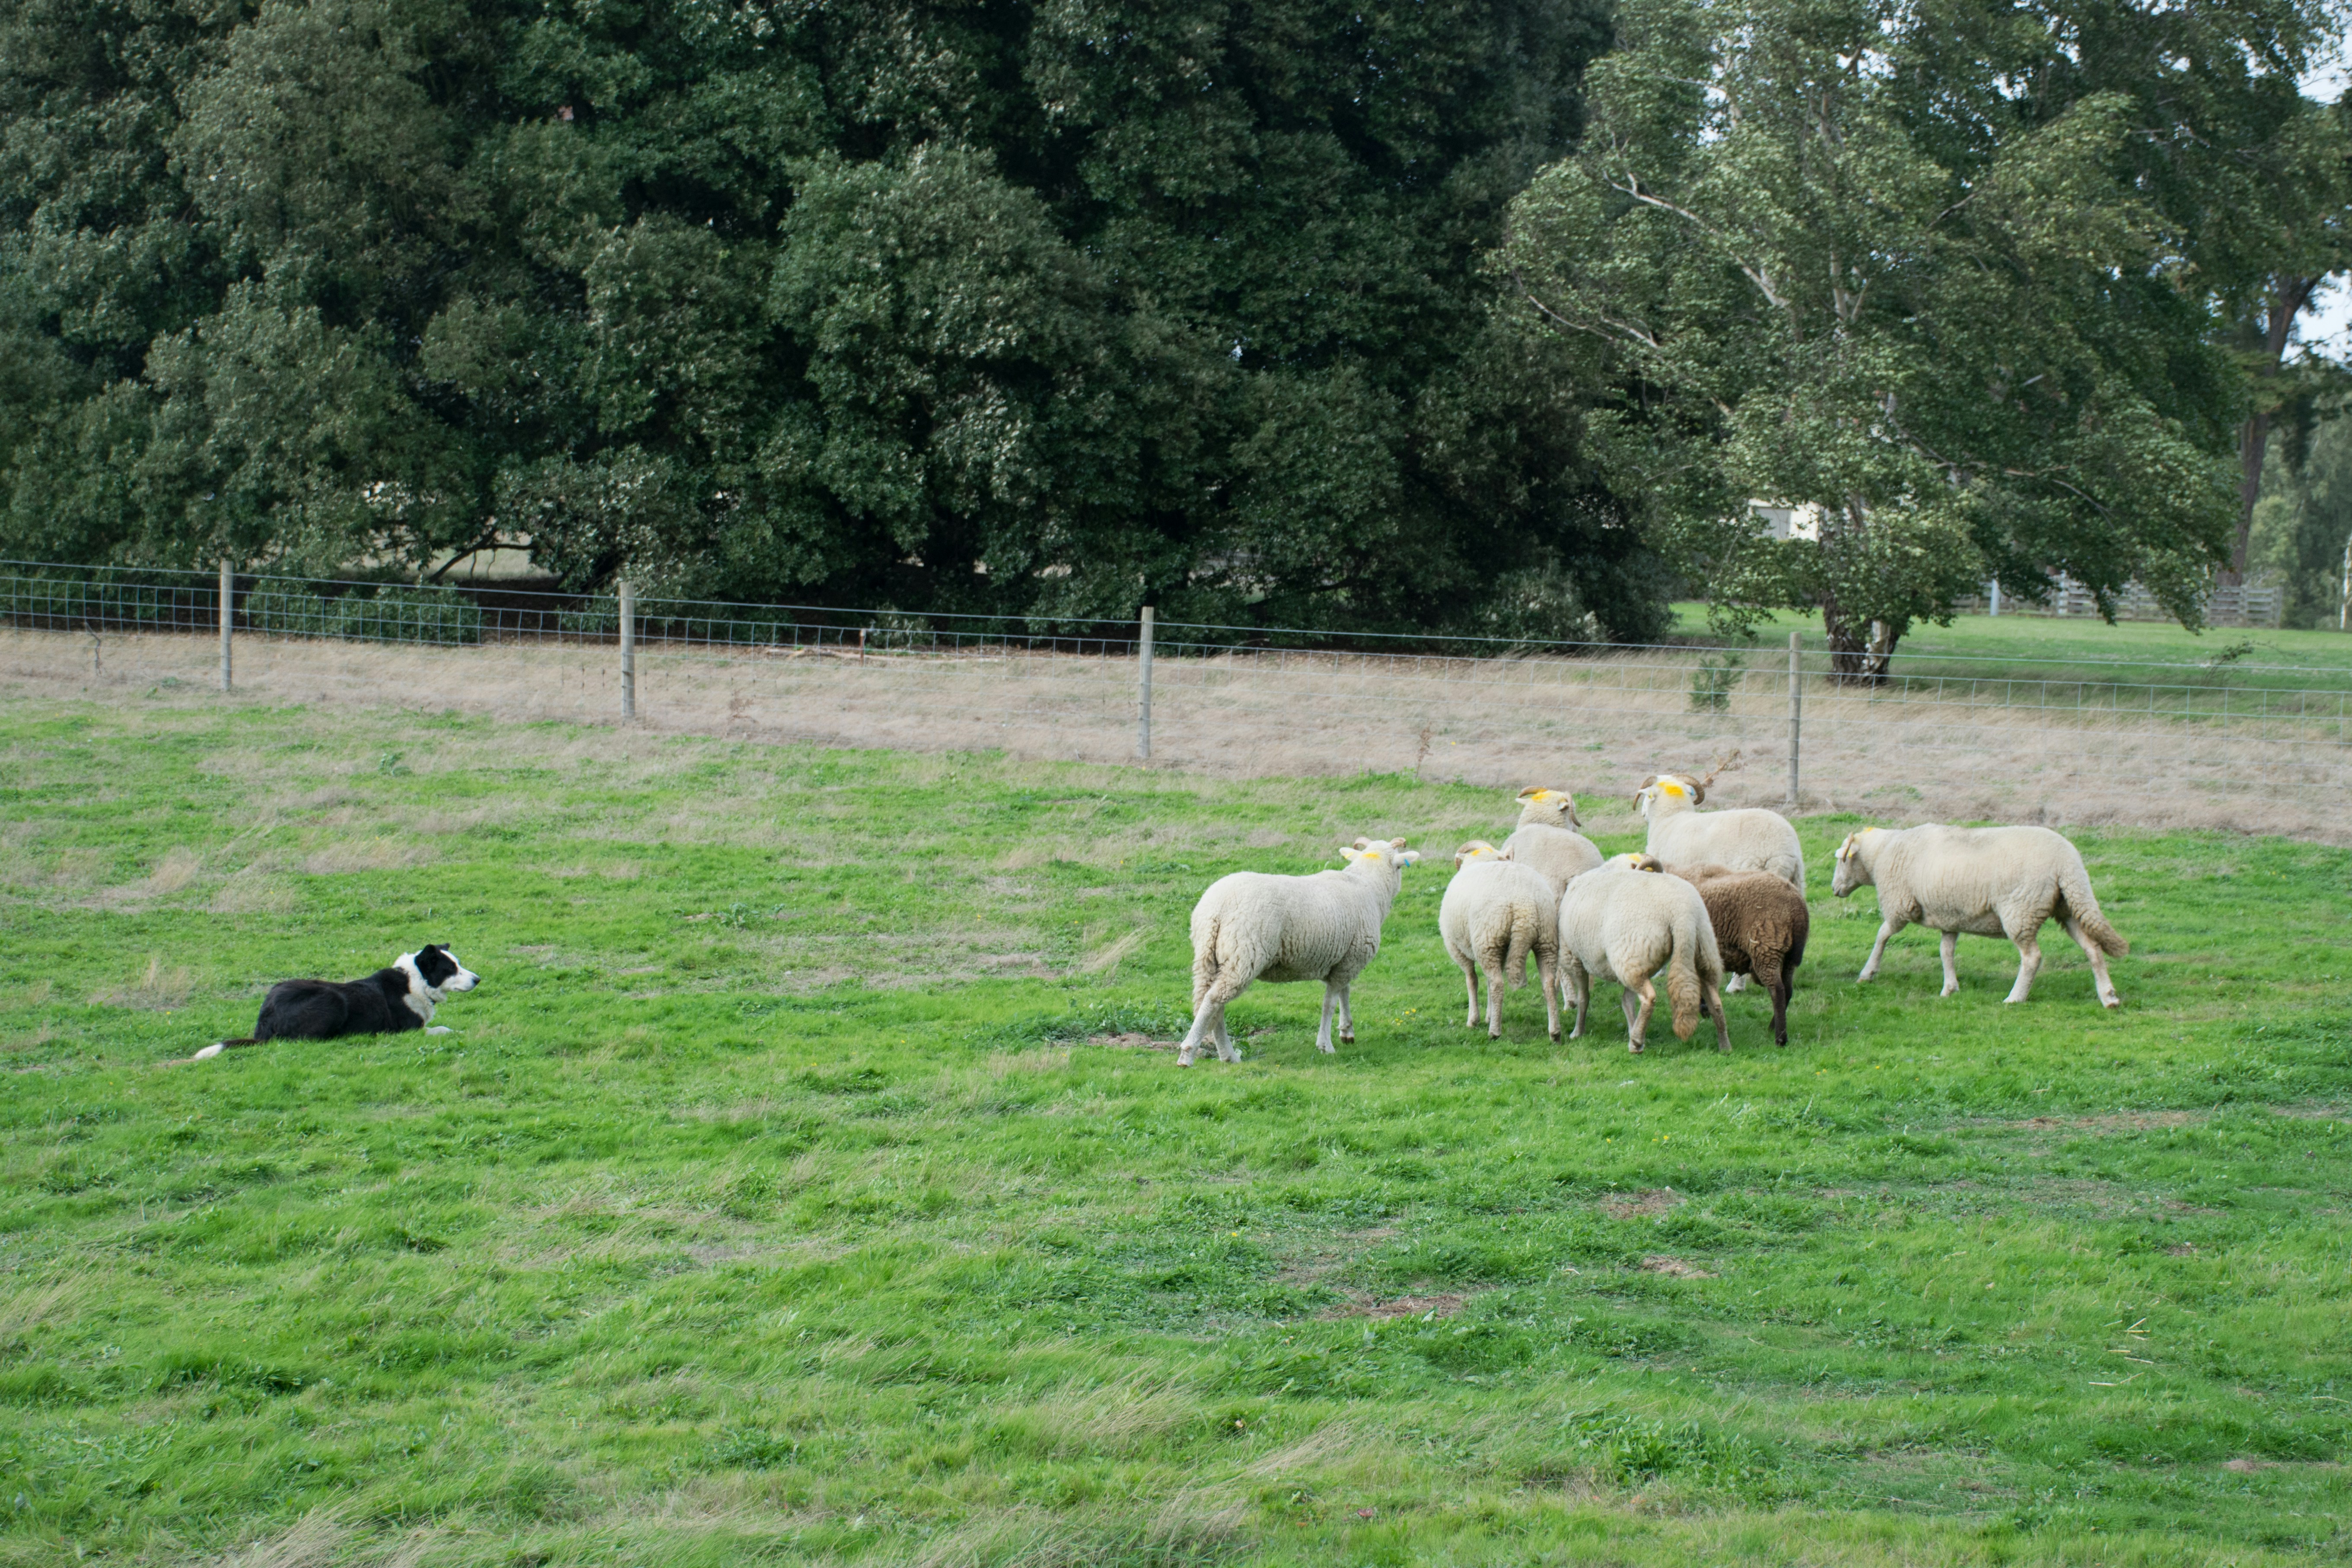 A sheepdog watches a group of sheep